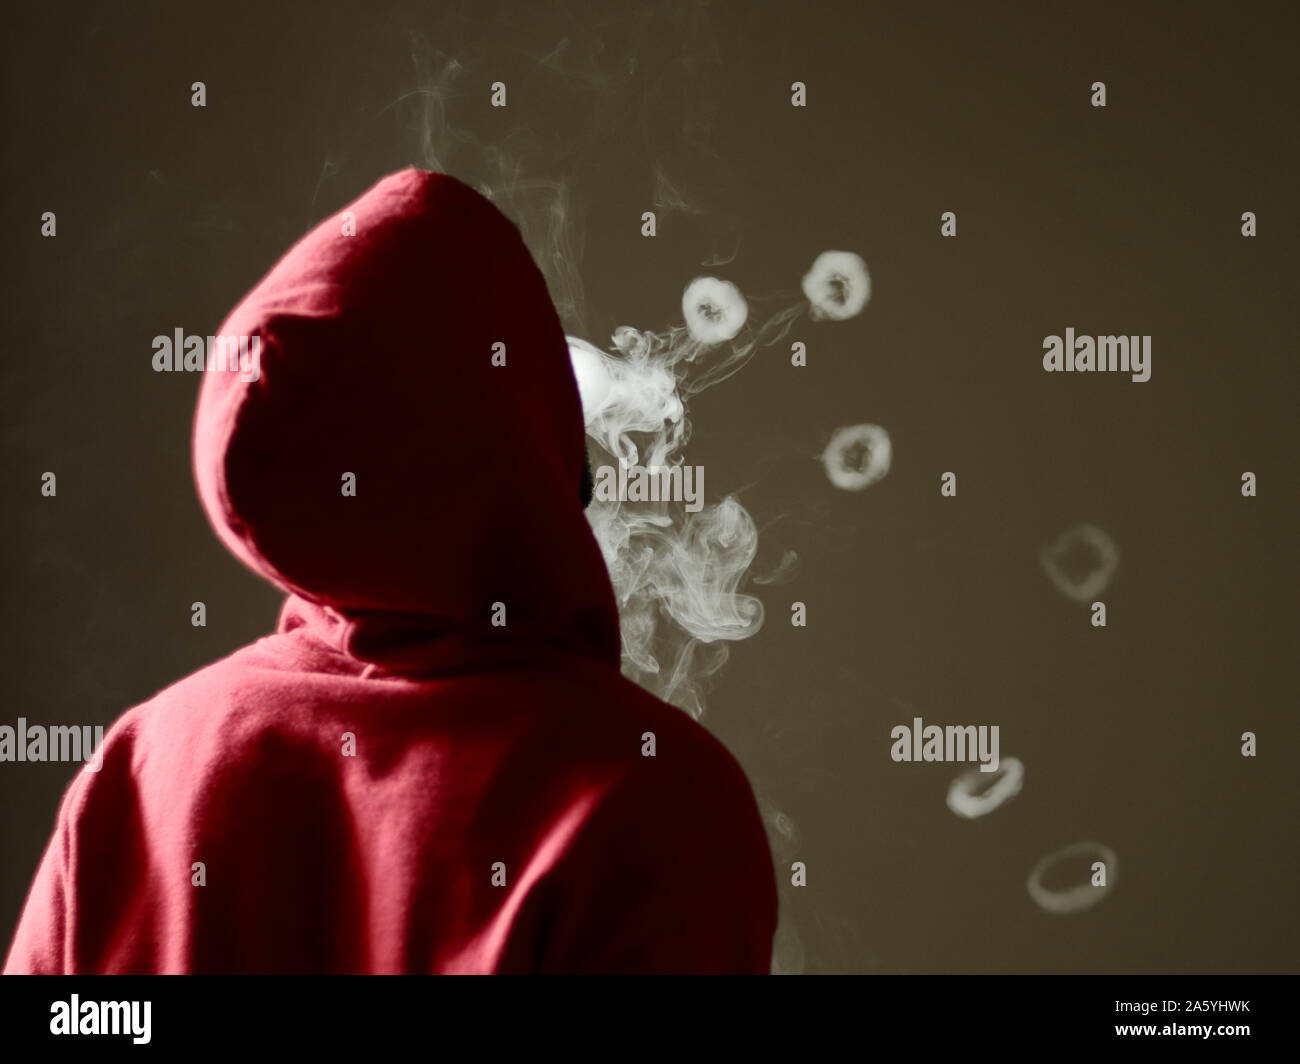 Young male in red hoodie vaping smoking, blows many smoke rings, isolated rear view Stock Photo